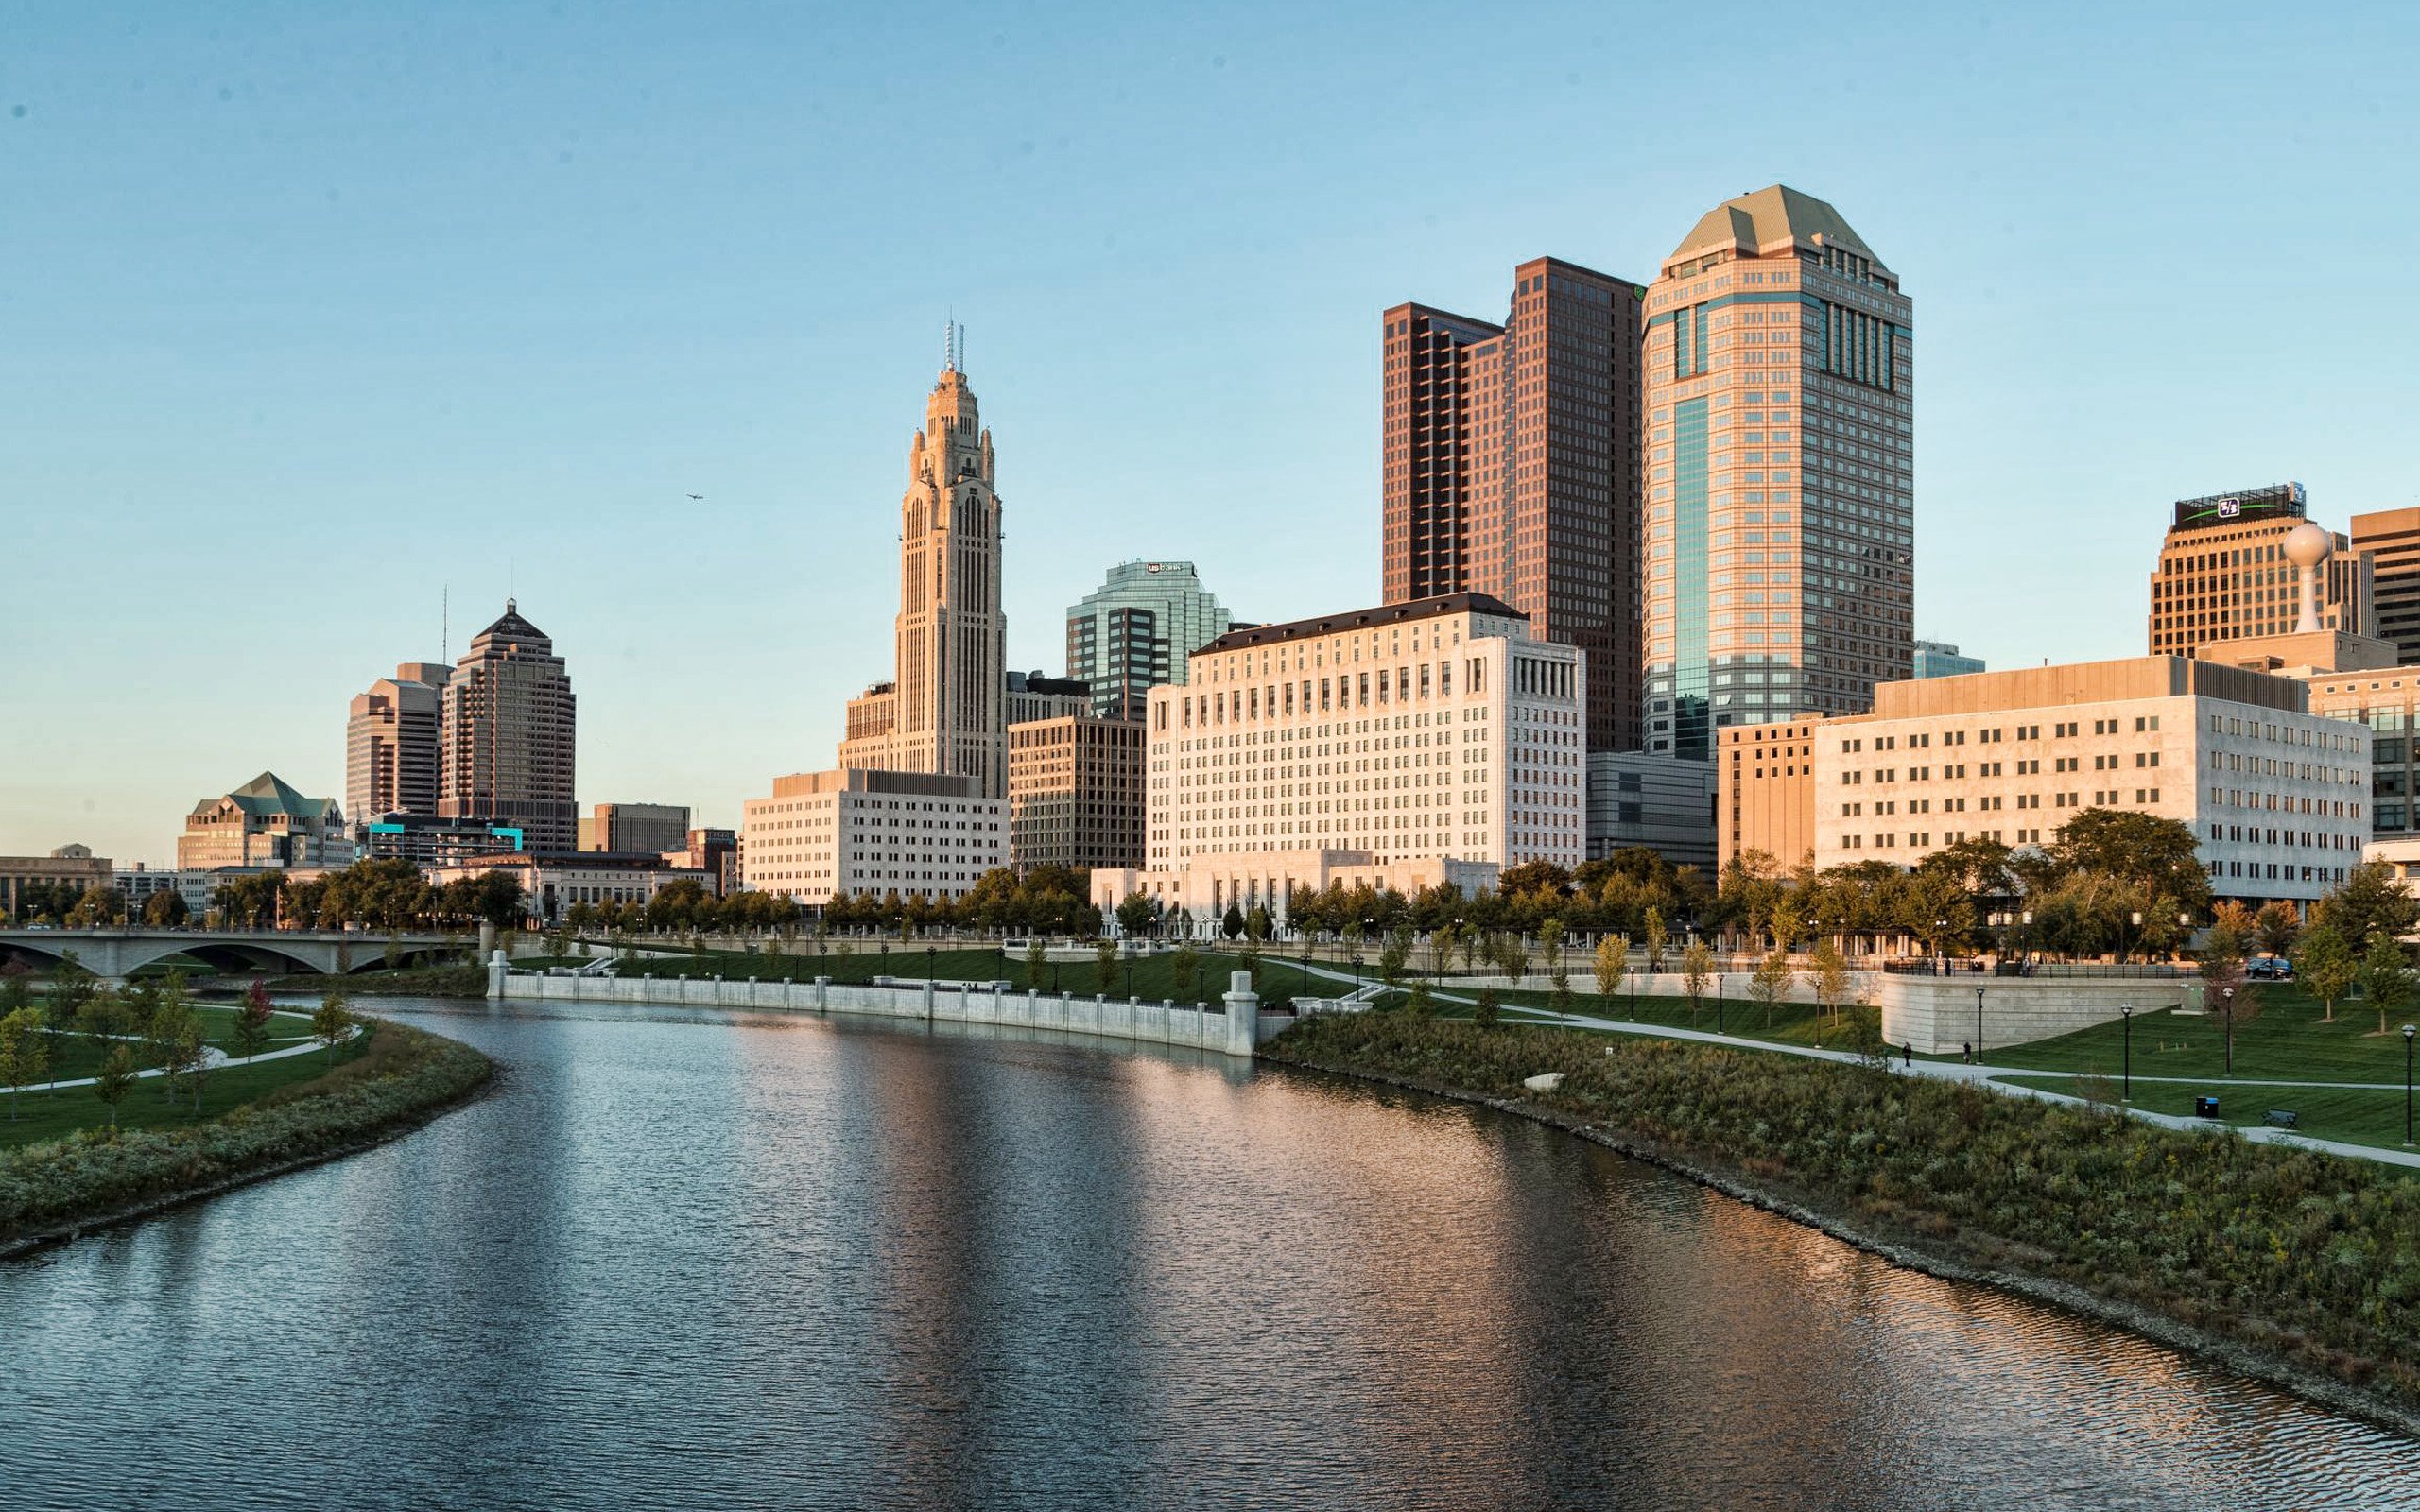 Download wallpaper Columbus, evening, sunset, skyscrapers, Columbus cityscape, Columbus skyline, Ohio, USA for desktop with resolution 2560x1600. High Quality HD picture wallpaper